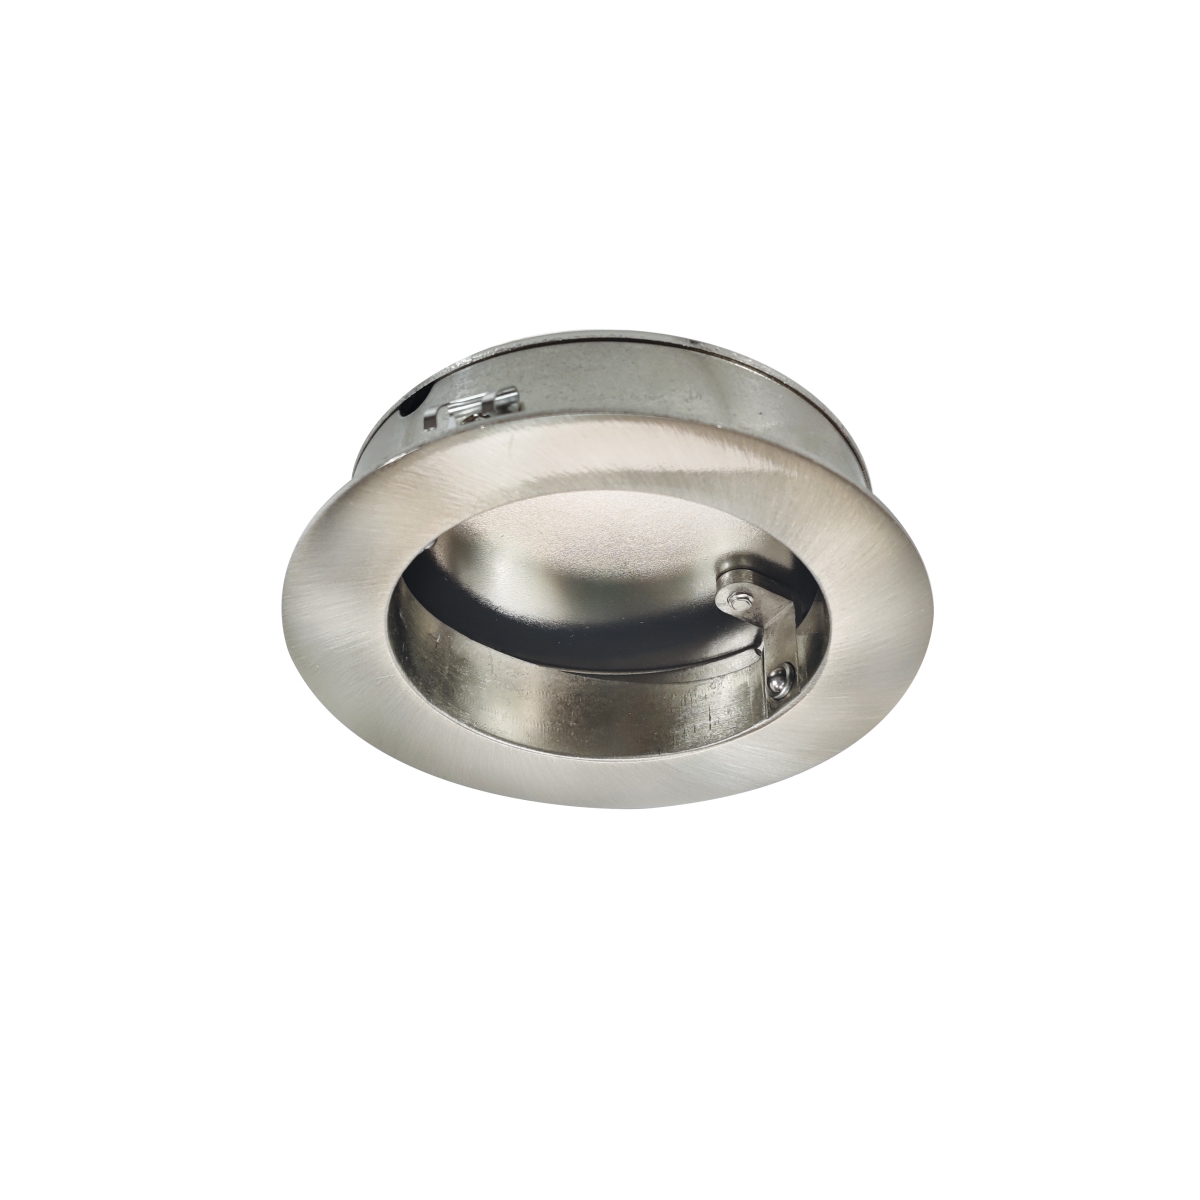 Picture of Nora Lighting NMP-ARECBN Adjustable LED Puck Light Recessed Mounting Bracket, Brushed Nickel